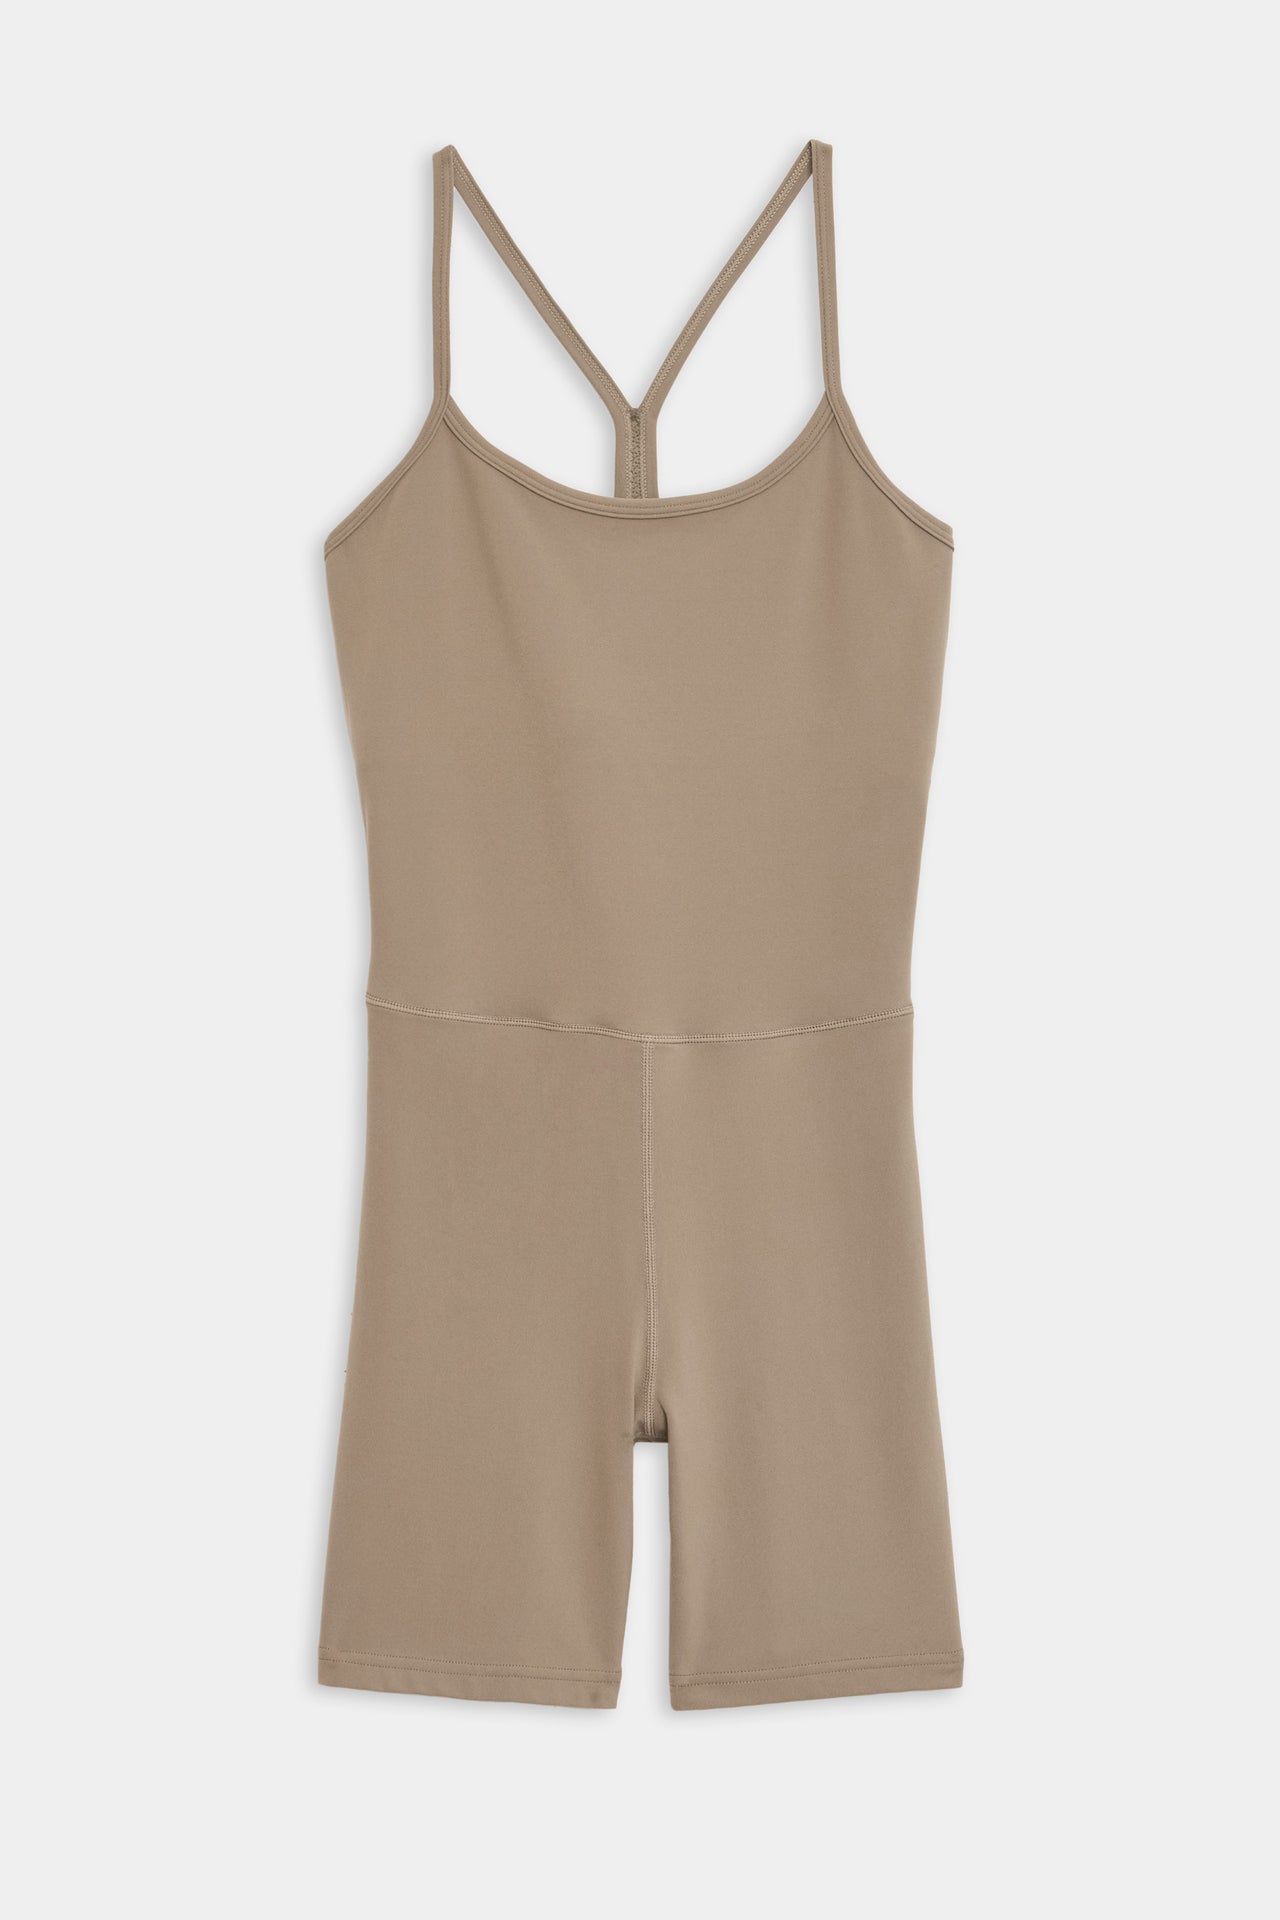 Flat view of light brown mid thigh spaghetti strap body suit/one piece